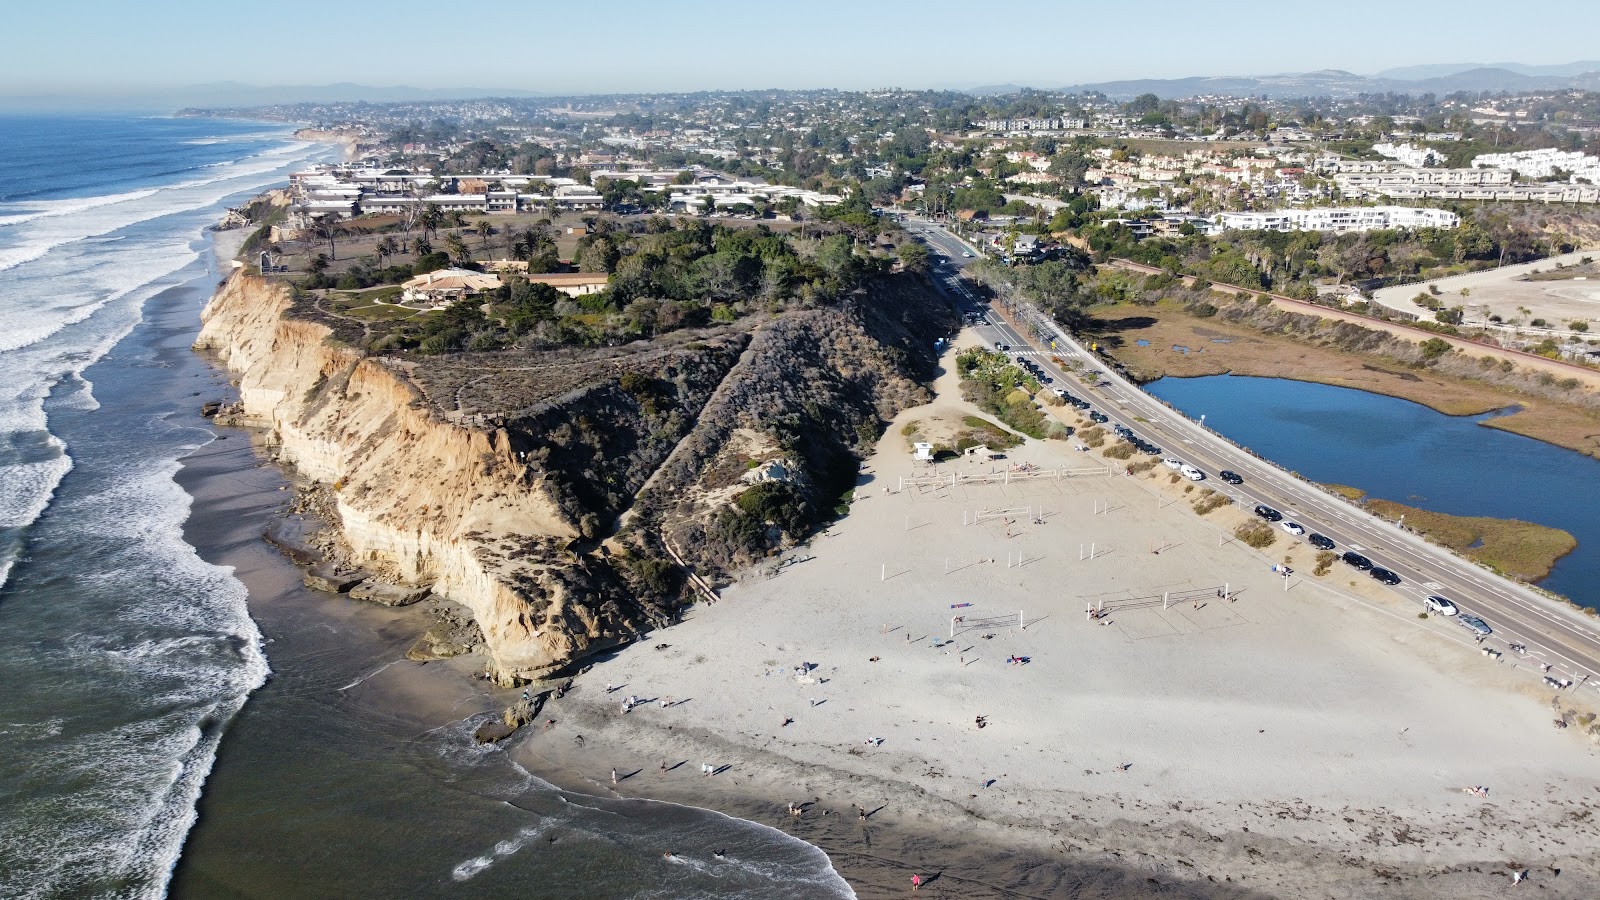 Photo of Del Mar Dog beach surrounded by mountains